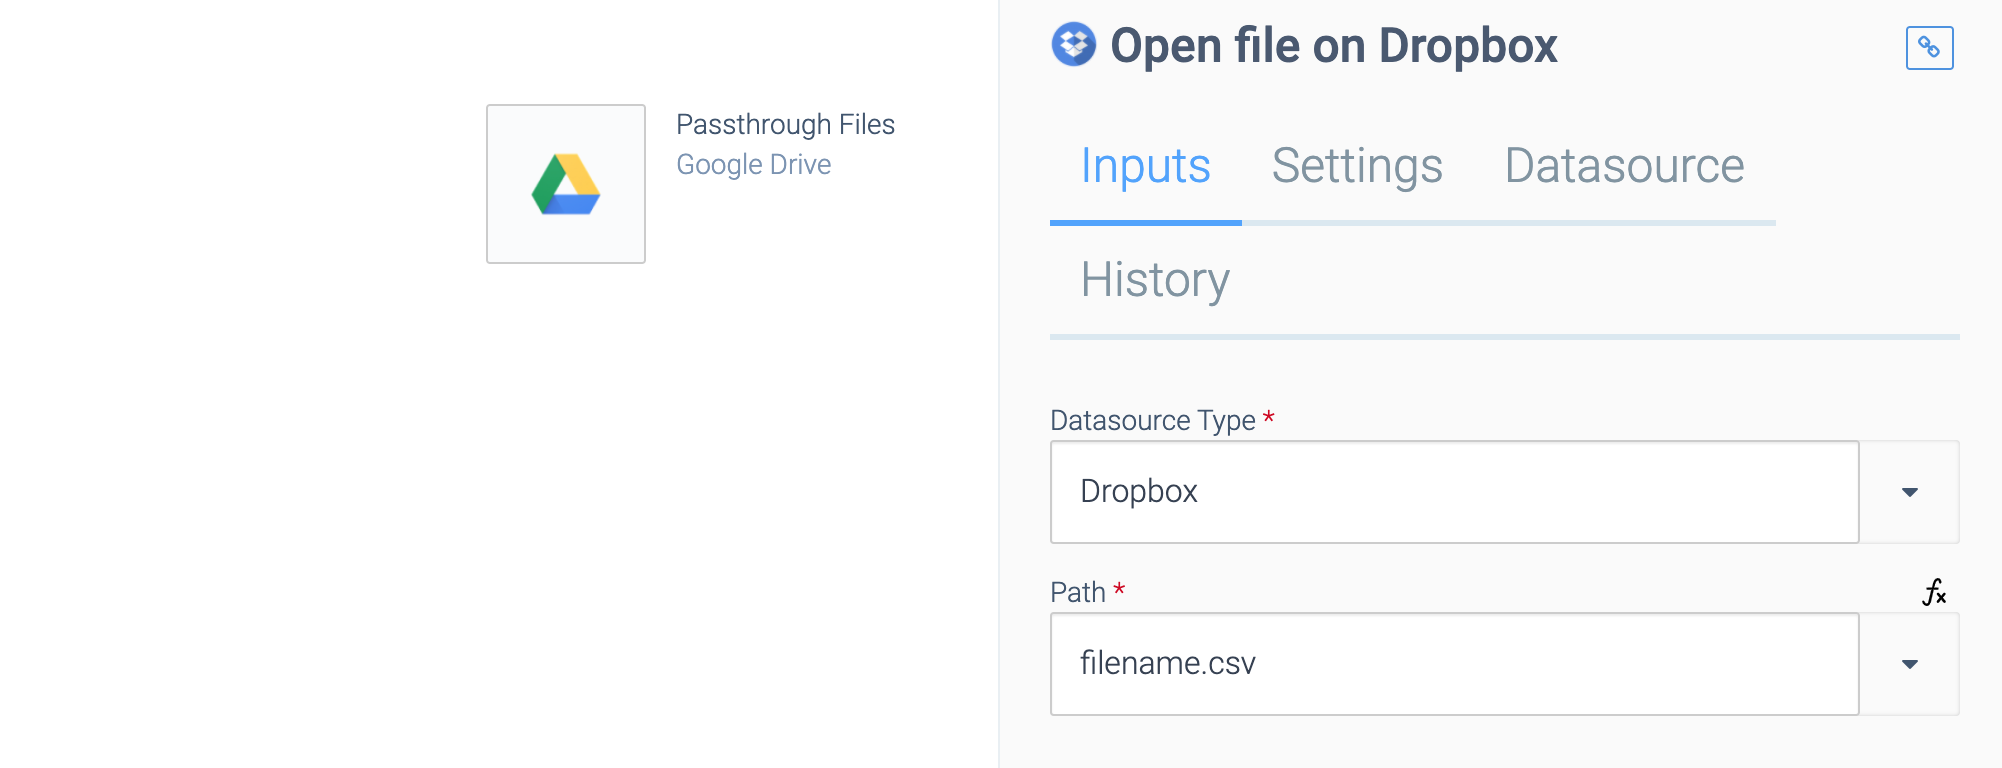 A Passthrough Files block connected to Google Drive and Dropbox.